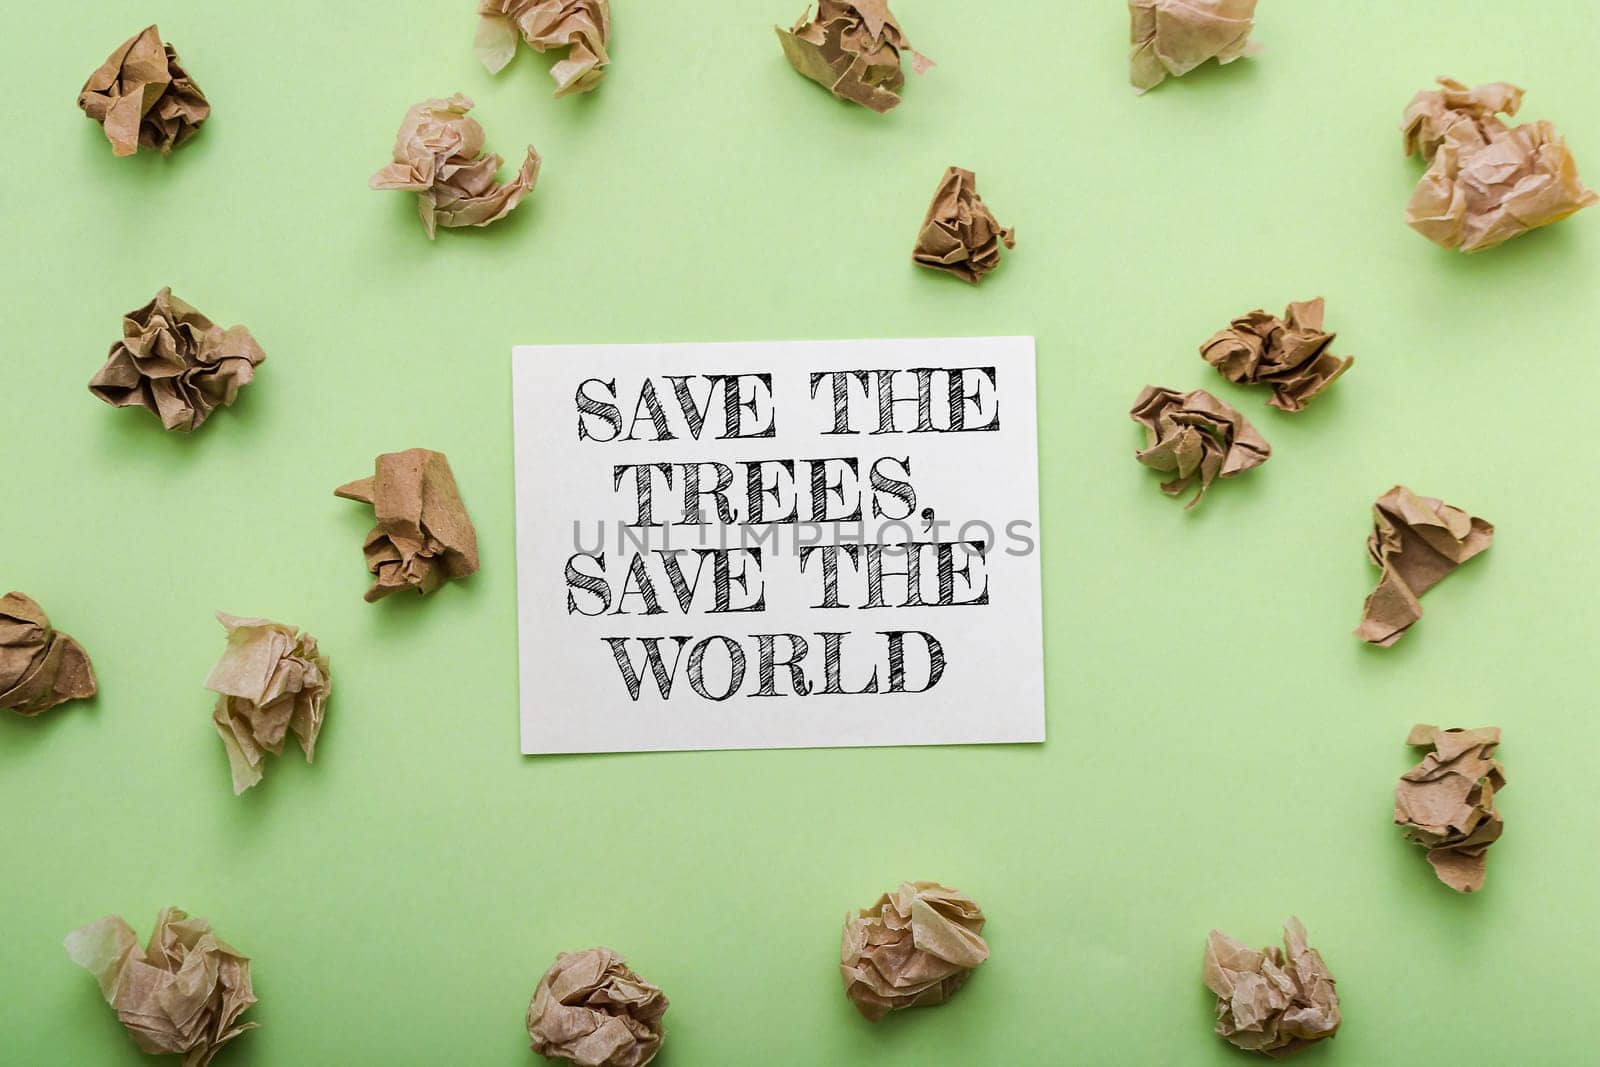 Save the trees save the world. The paper is crumpled and torn. The paper is on a green background